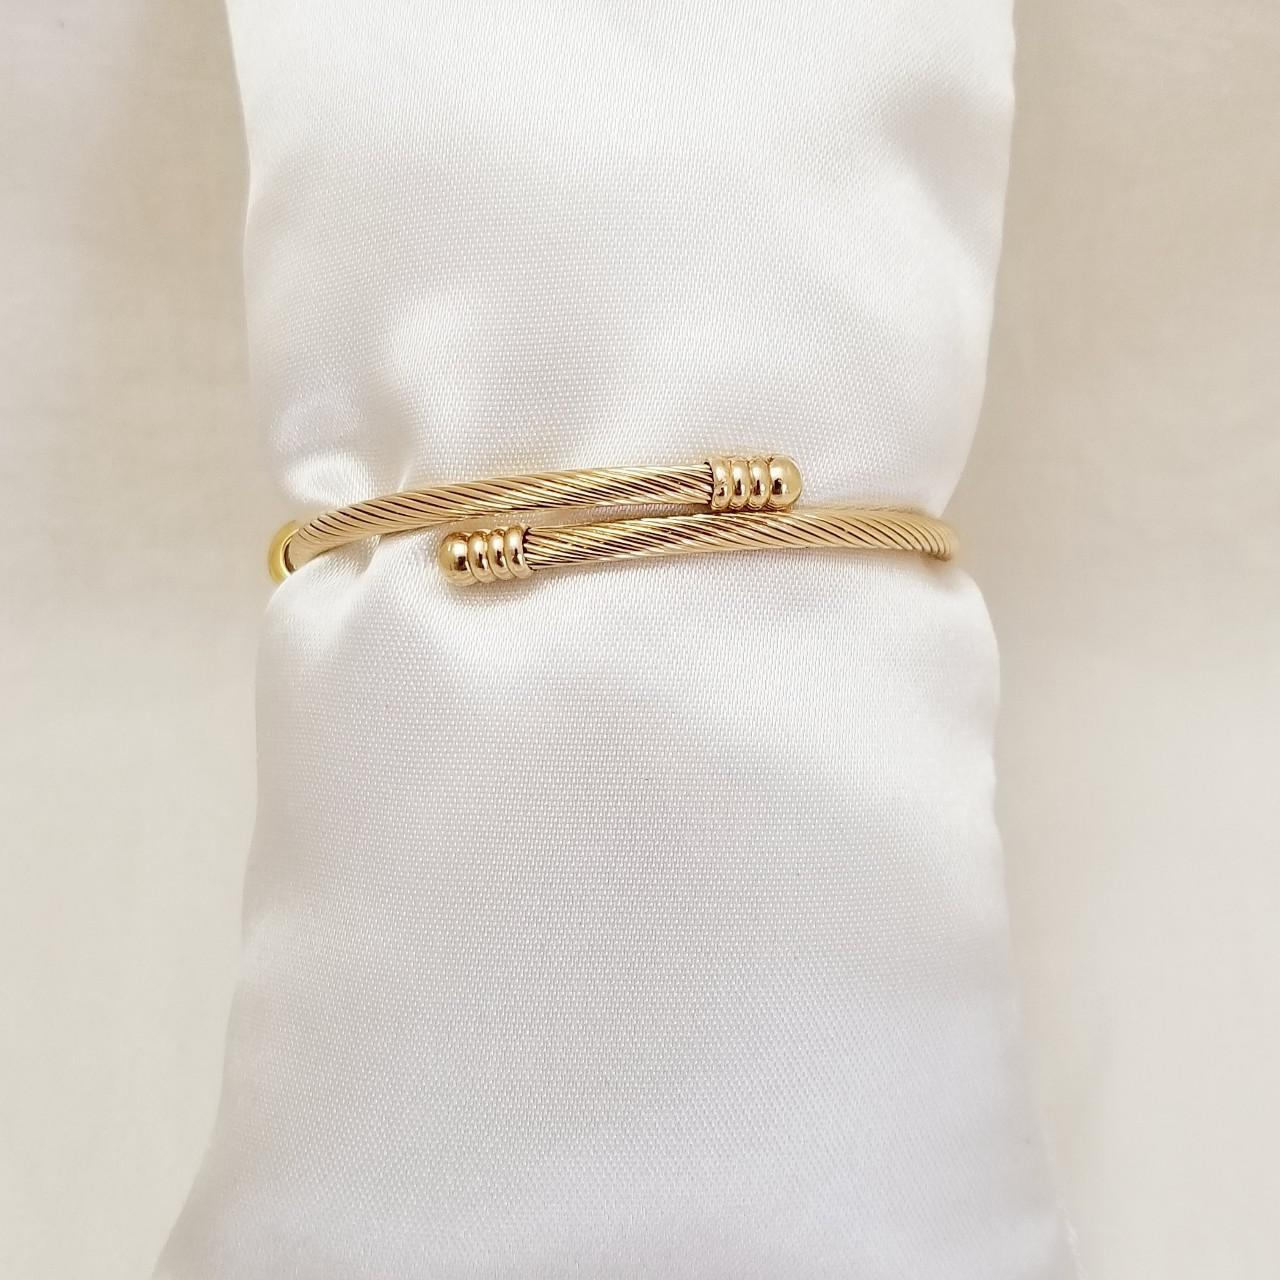 Women's White and Gold Watch (4)